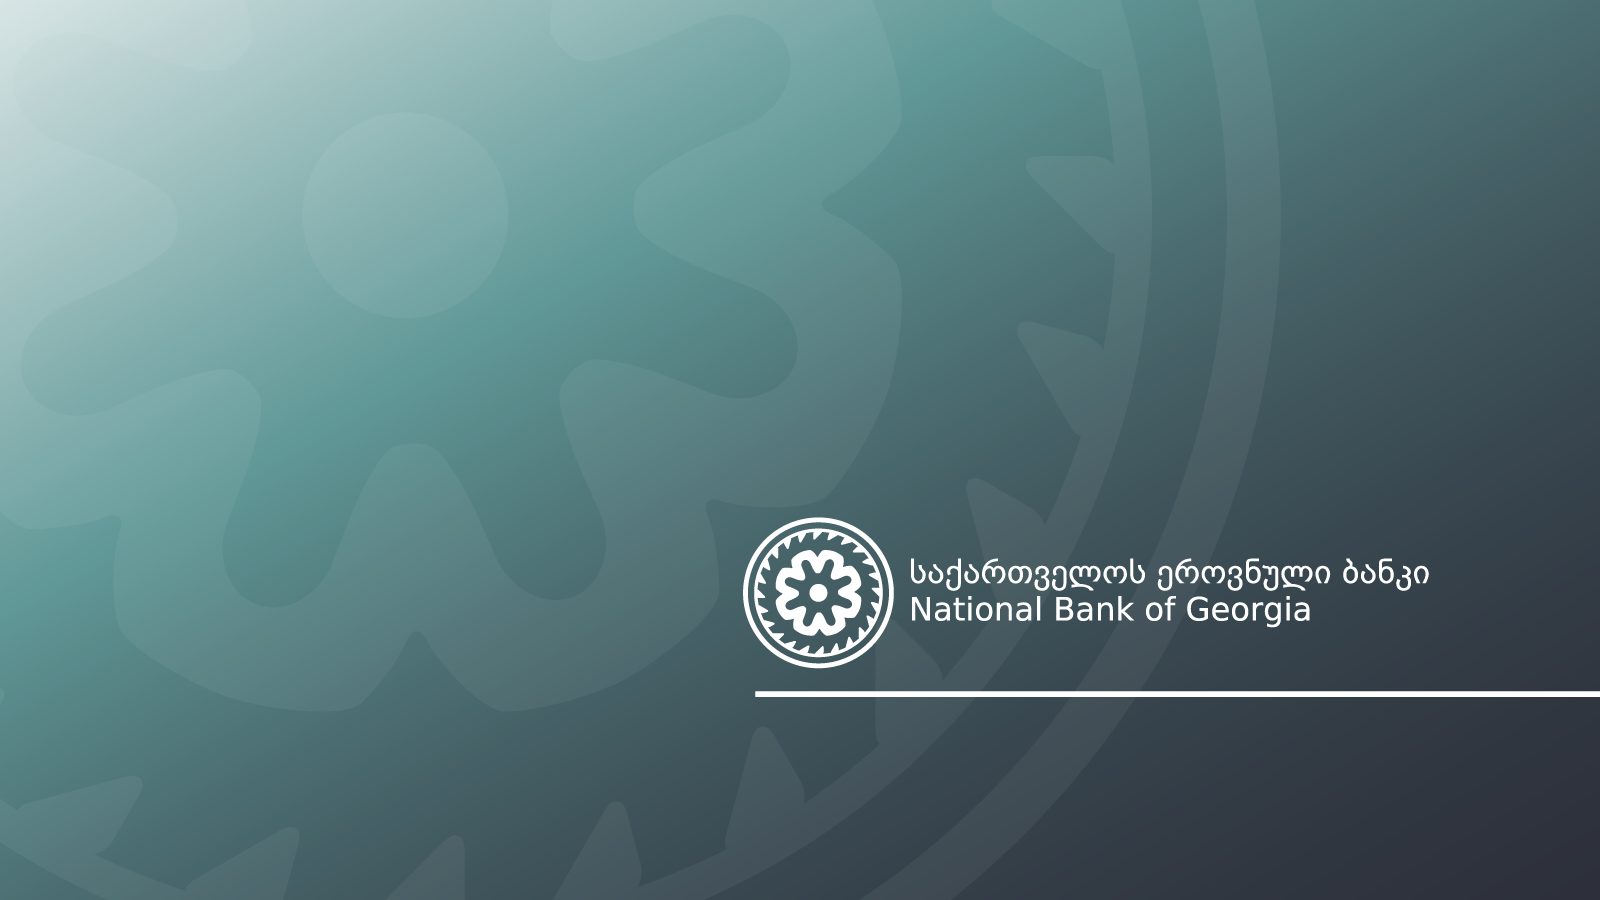 IMF: The National Bank of Georgia Remains Committed to Price Stability and to Exchange rate Flexibility